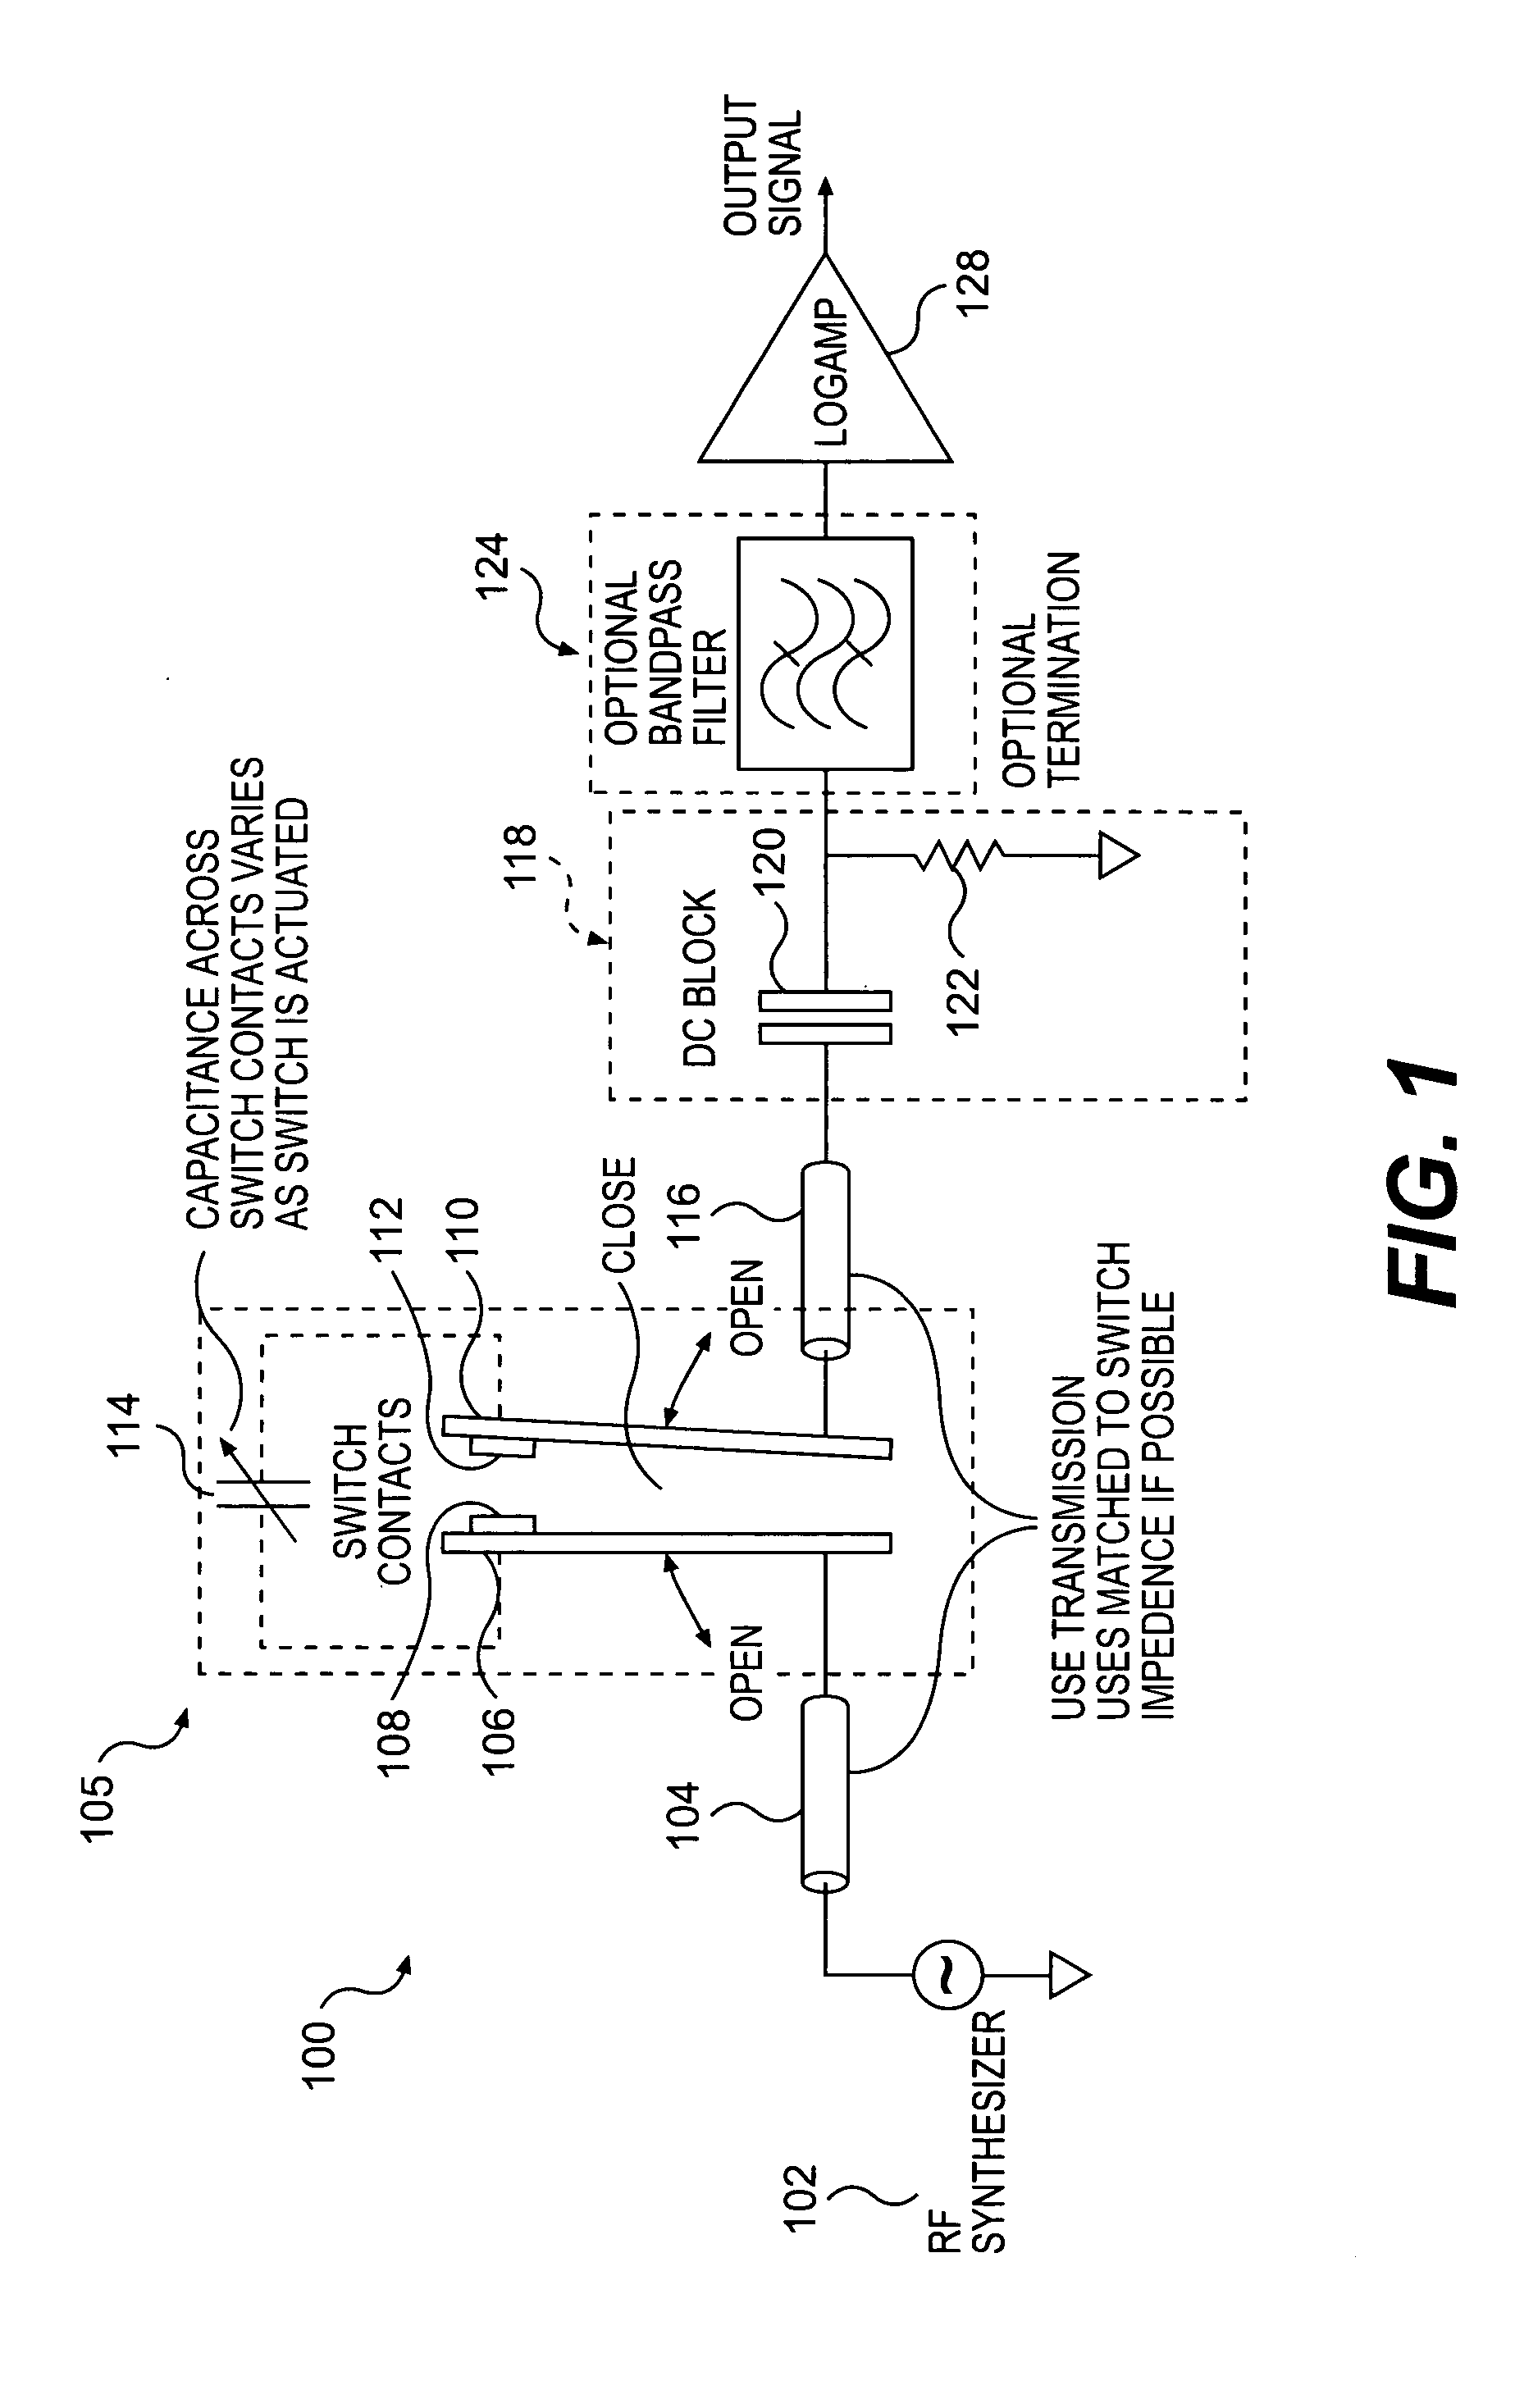 Apparatus and method for determining contact dynamics